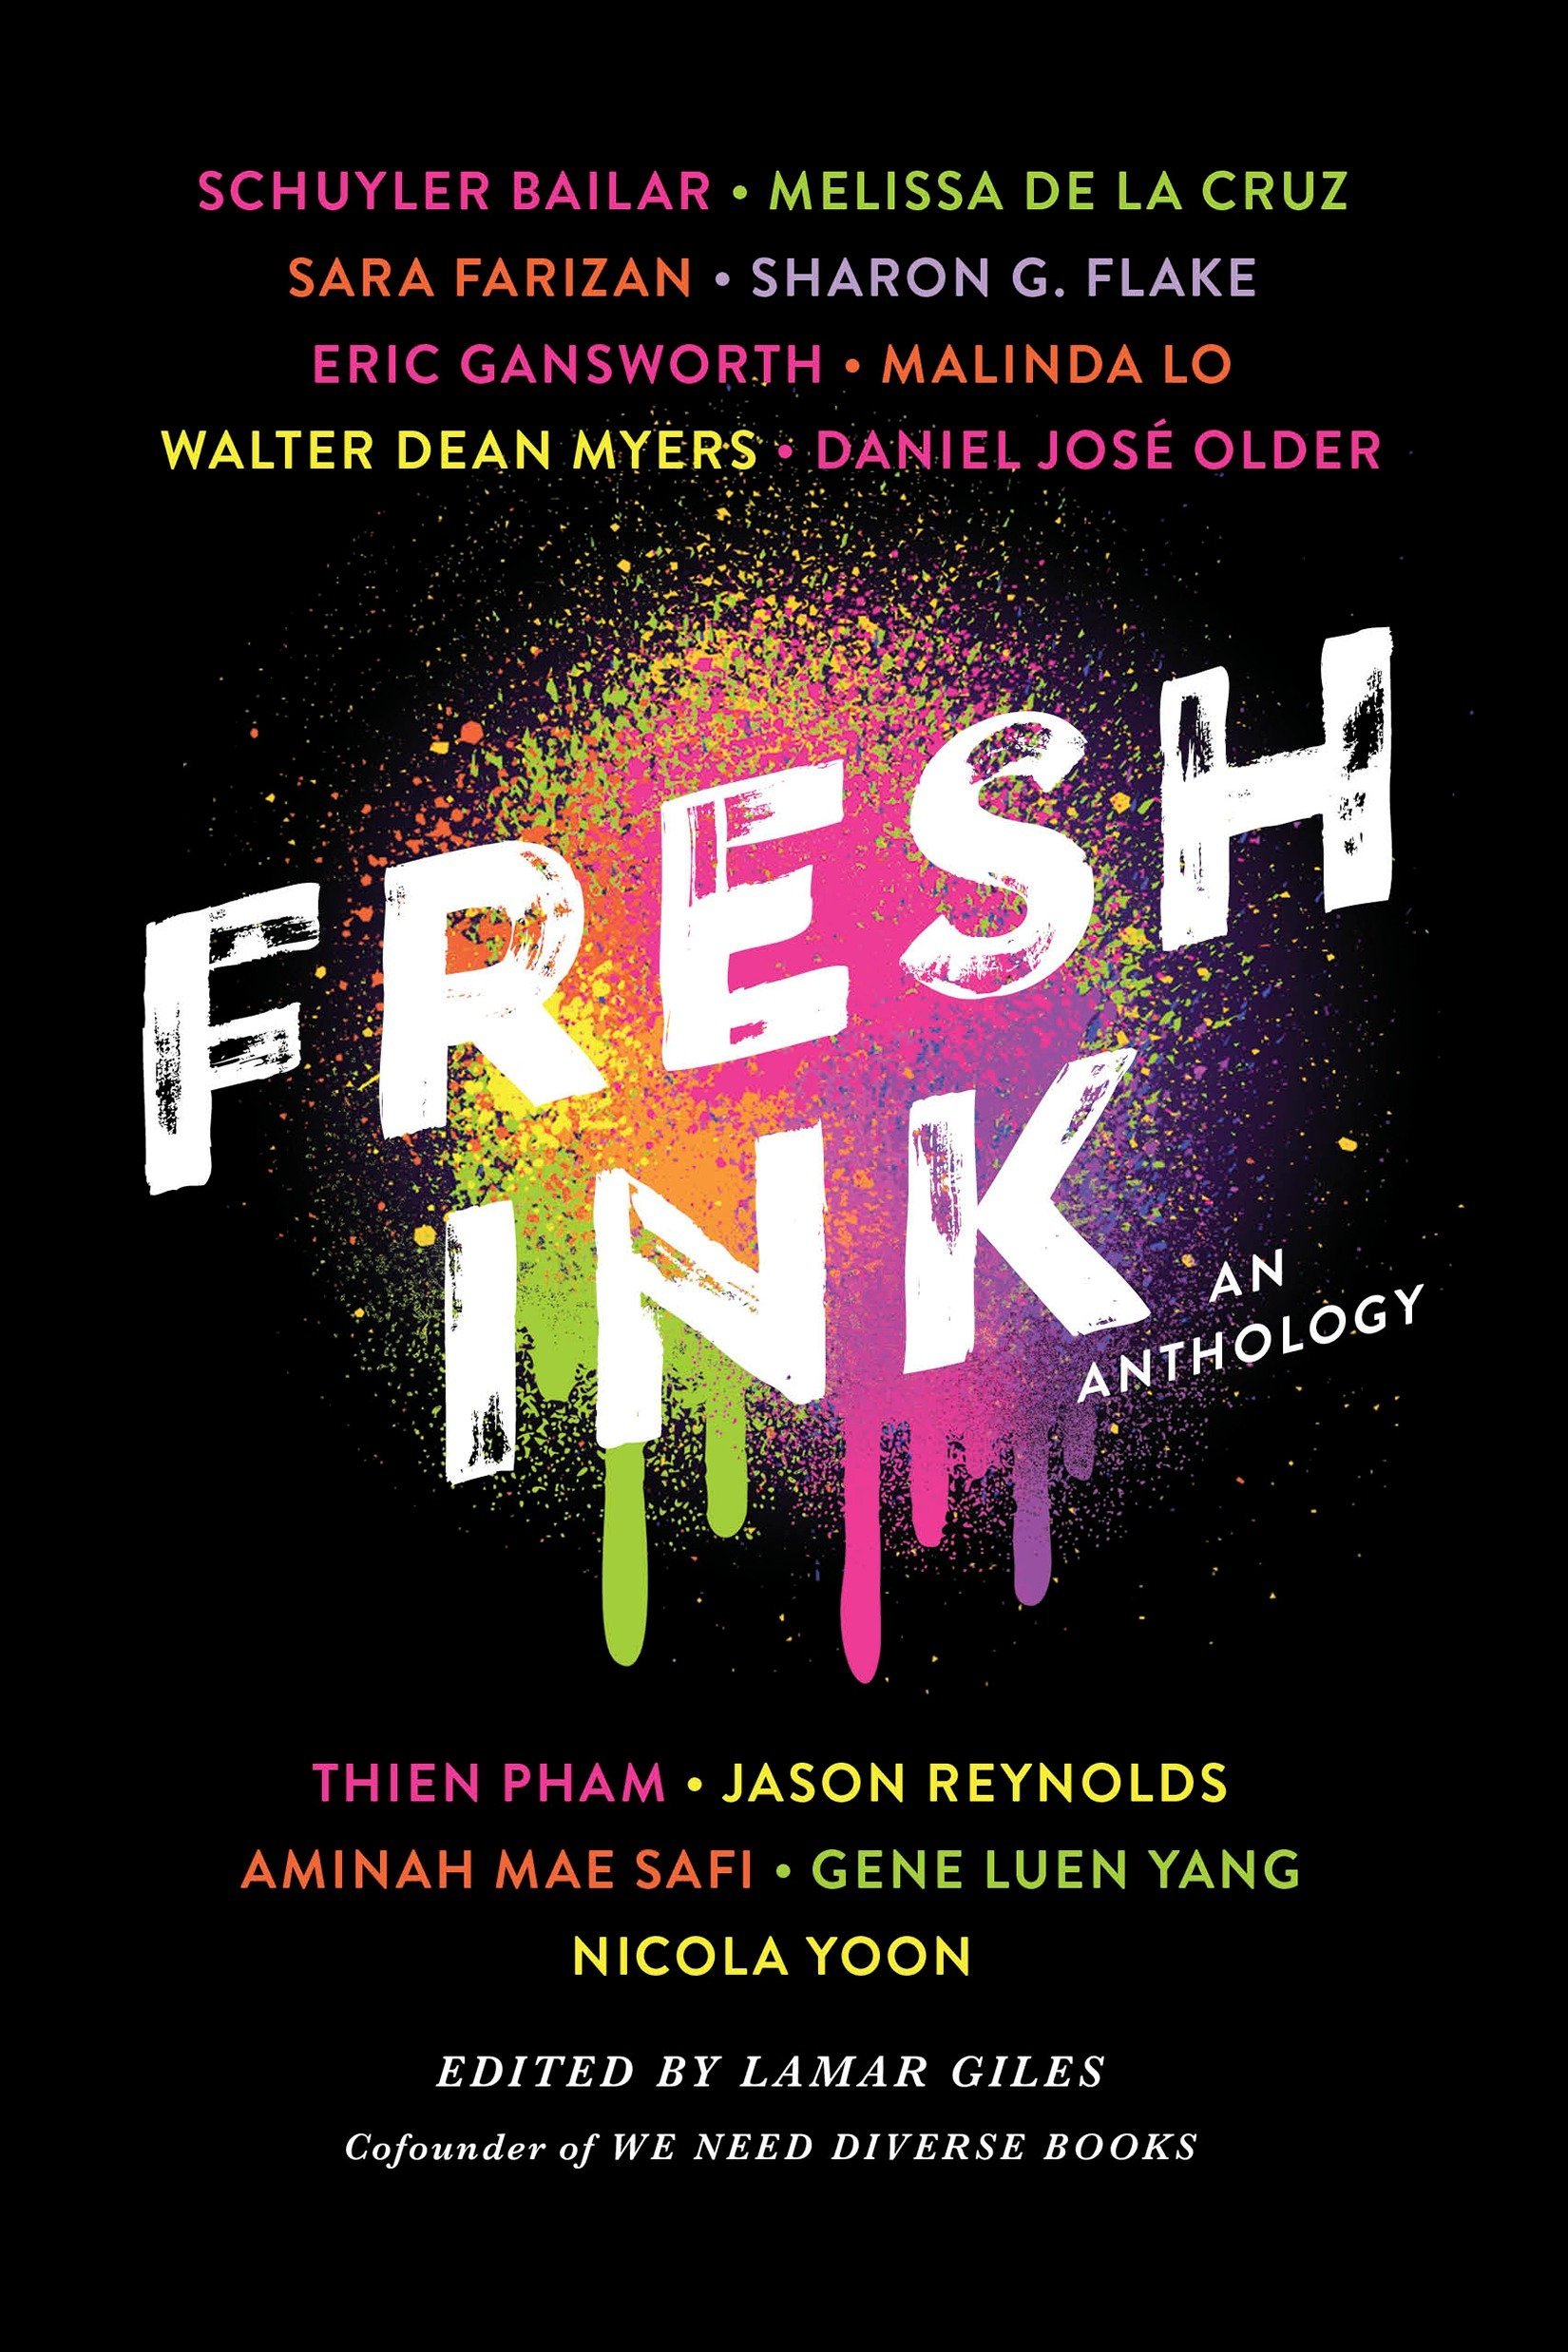 ARC Review: “Fresh Ink: An Anthology” by Lamar Giles (Editor)